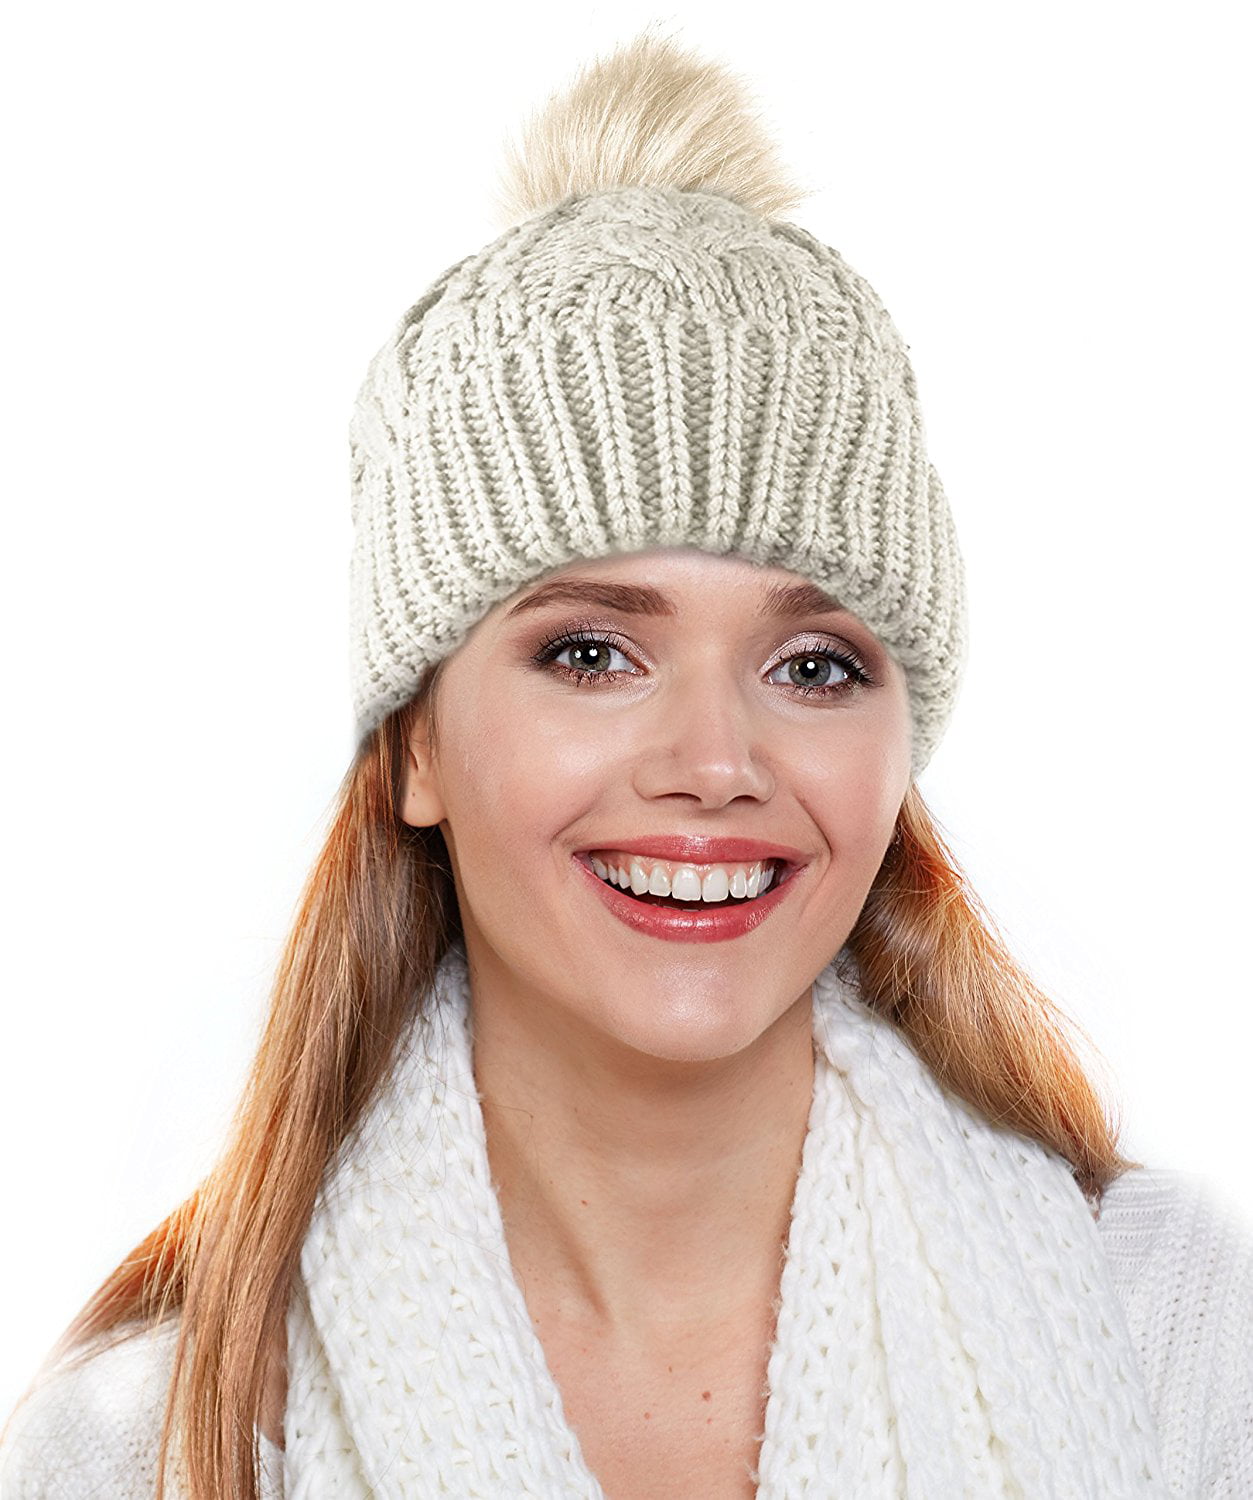 Girls Winter Cable Knit Pom Pom Beanie One Size Various Colors 